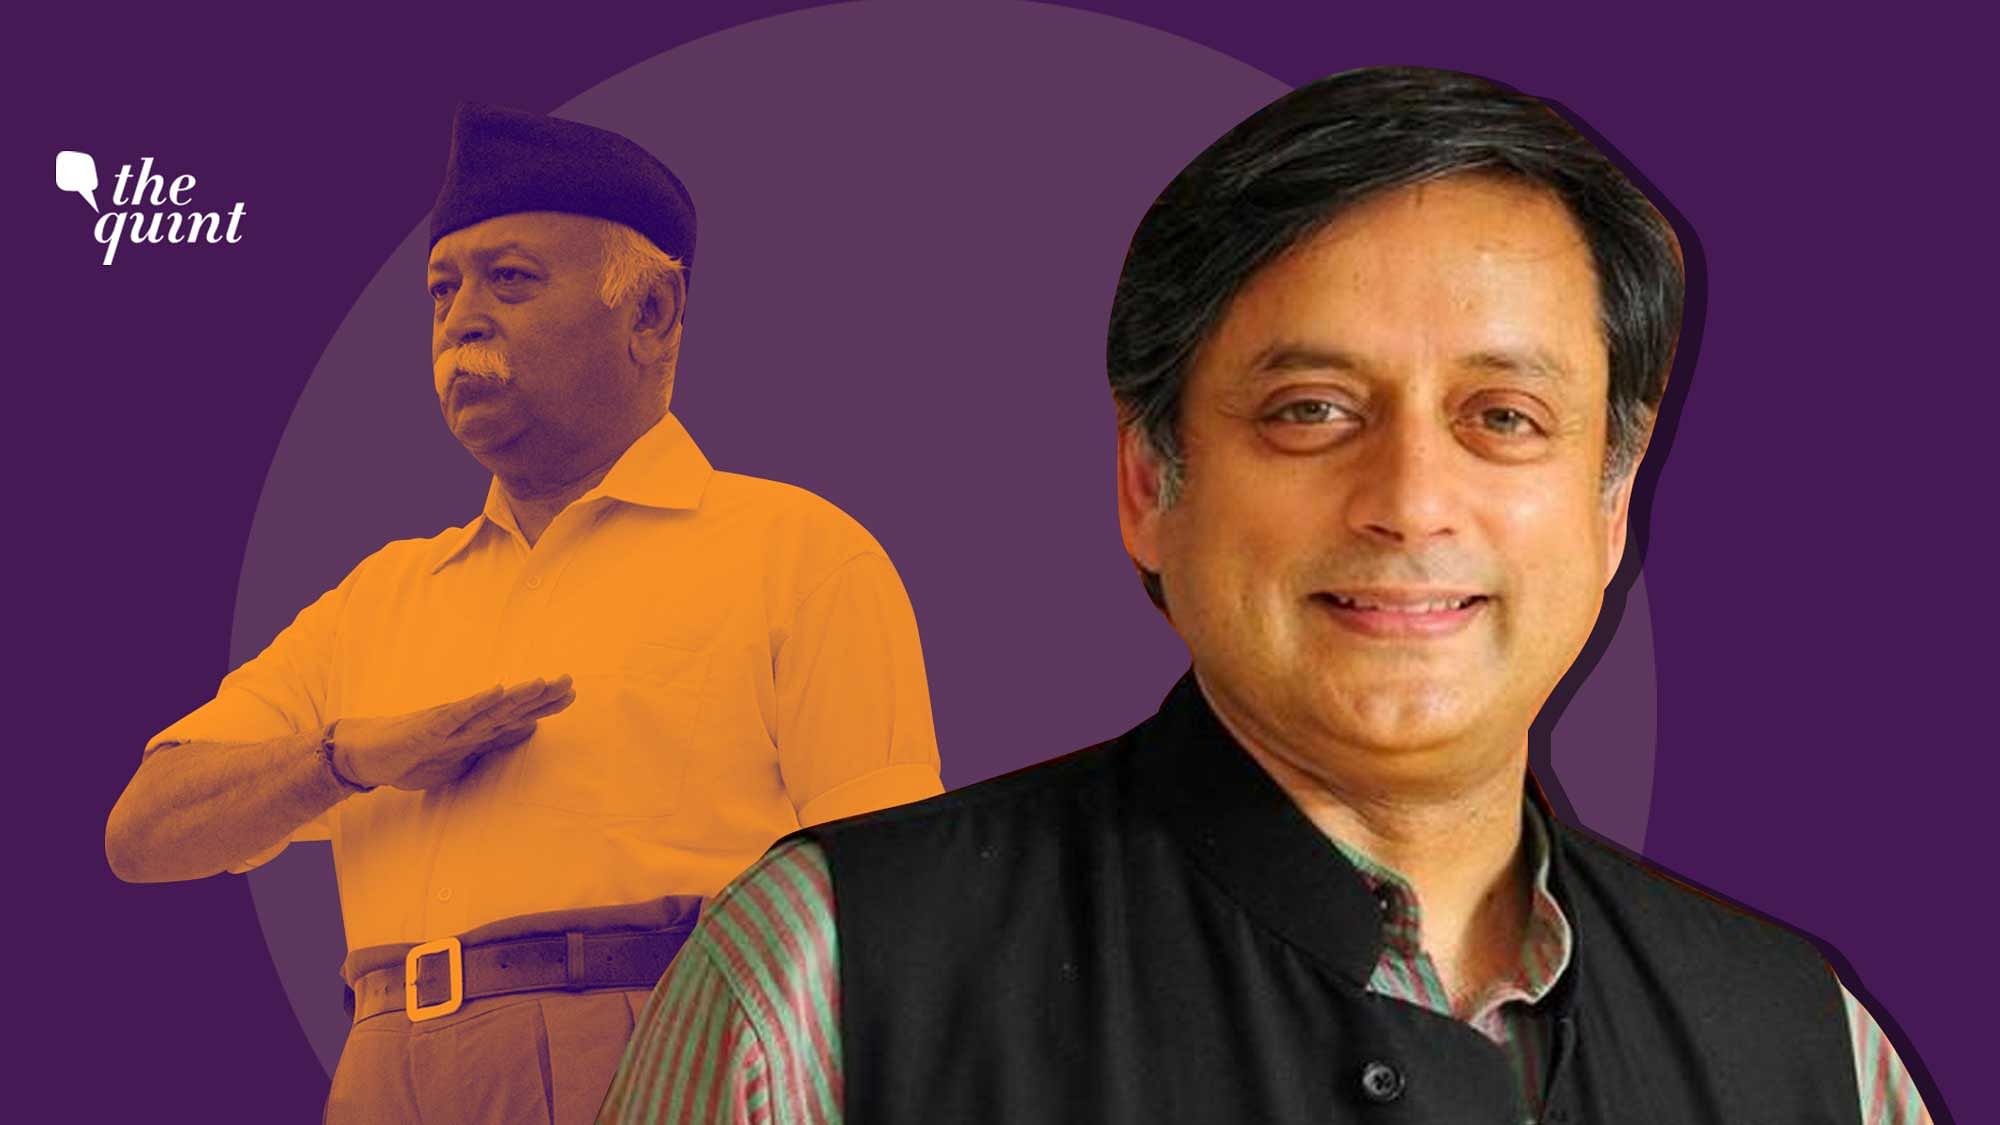 Image of RSS Chief Mohan Bhagwat (L) and Congress leader Dr Shashi Tharoor (R) used for representational purposes.